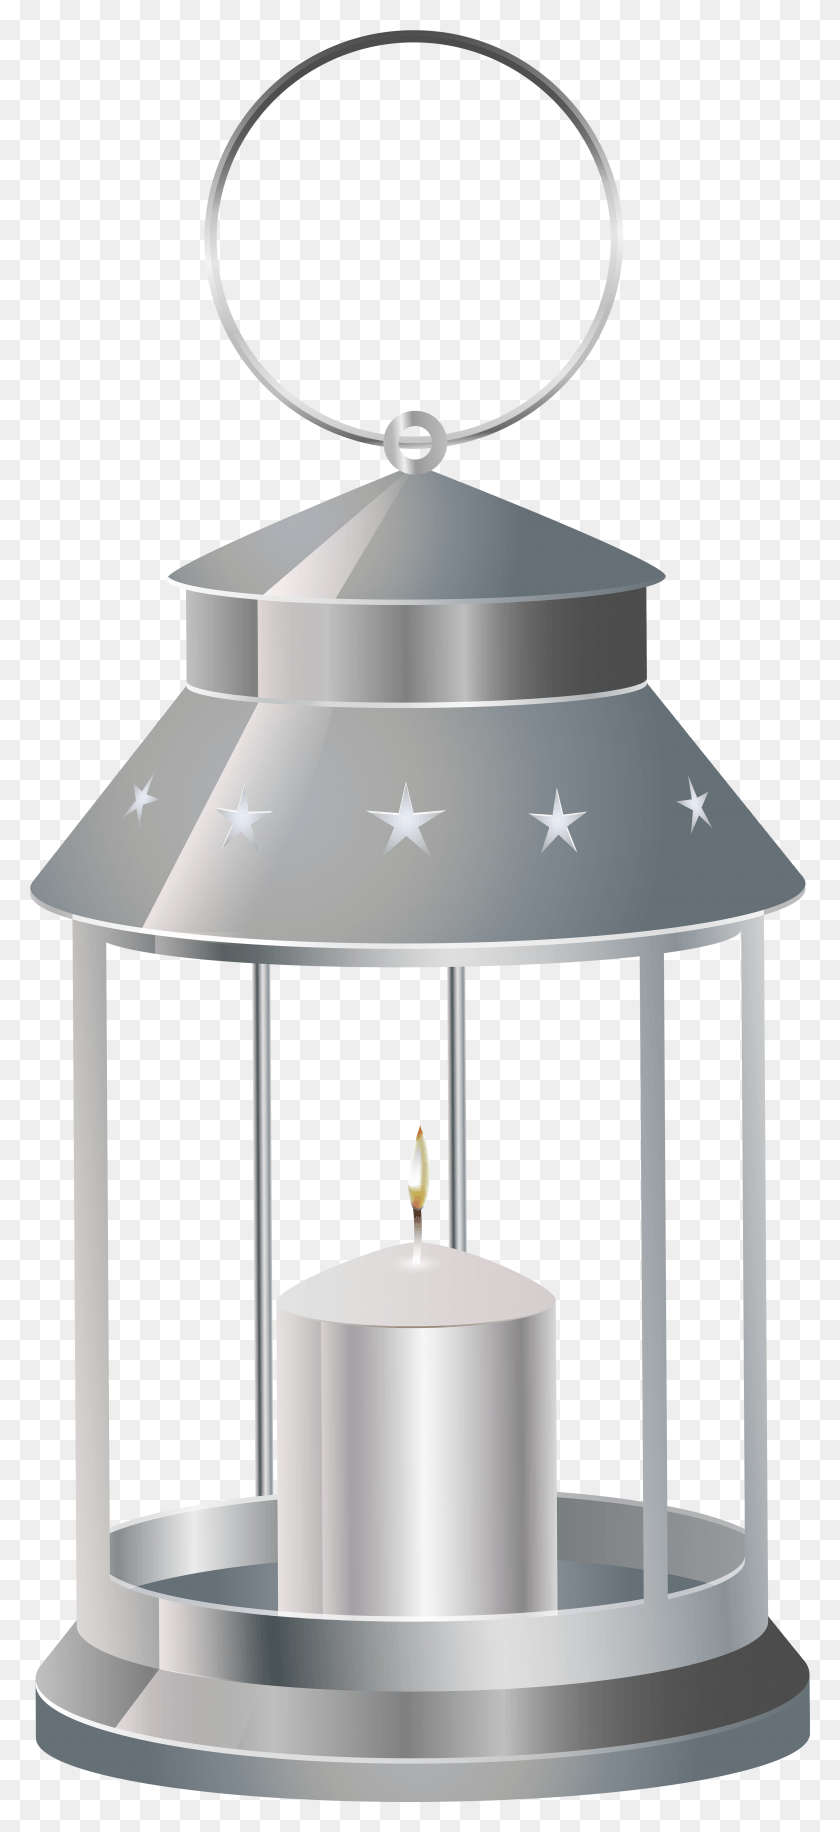 3484x7918 Silver Lantern With Candle Transparent Clip Art Transparent Background Lantern Clipart, Lamp, Gazebo, Lighting HD PNG Download